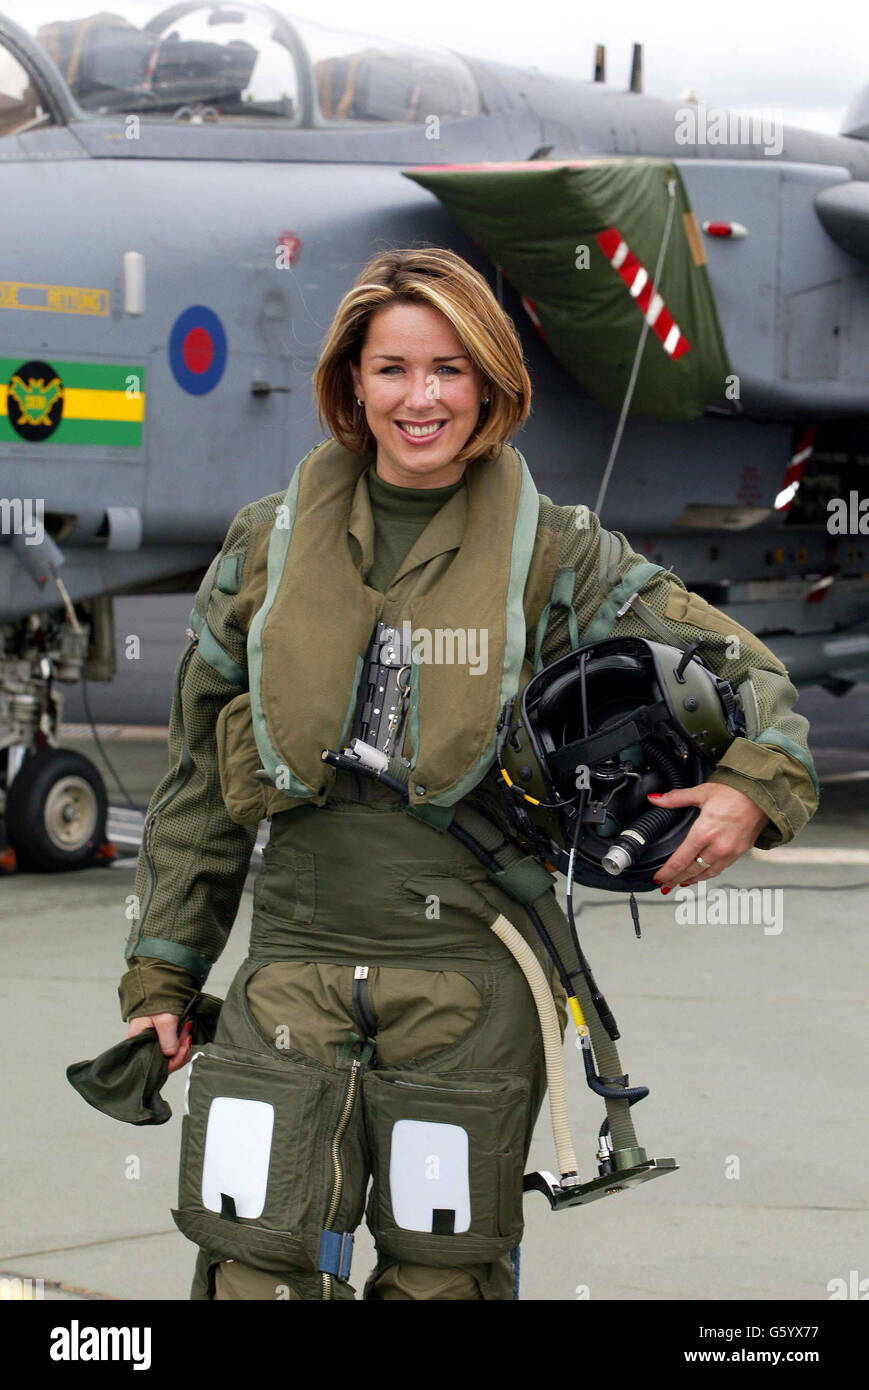 Claire Sweeney with the RAF Stock Photo - Alamy